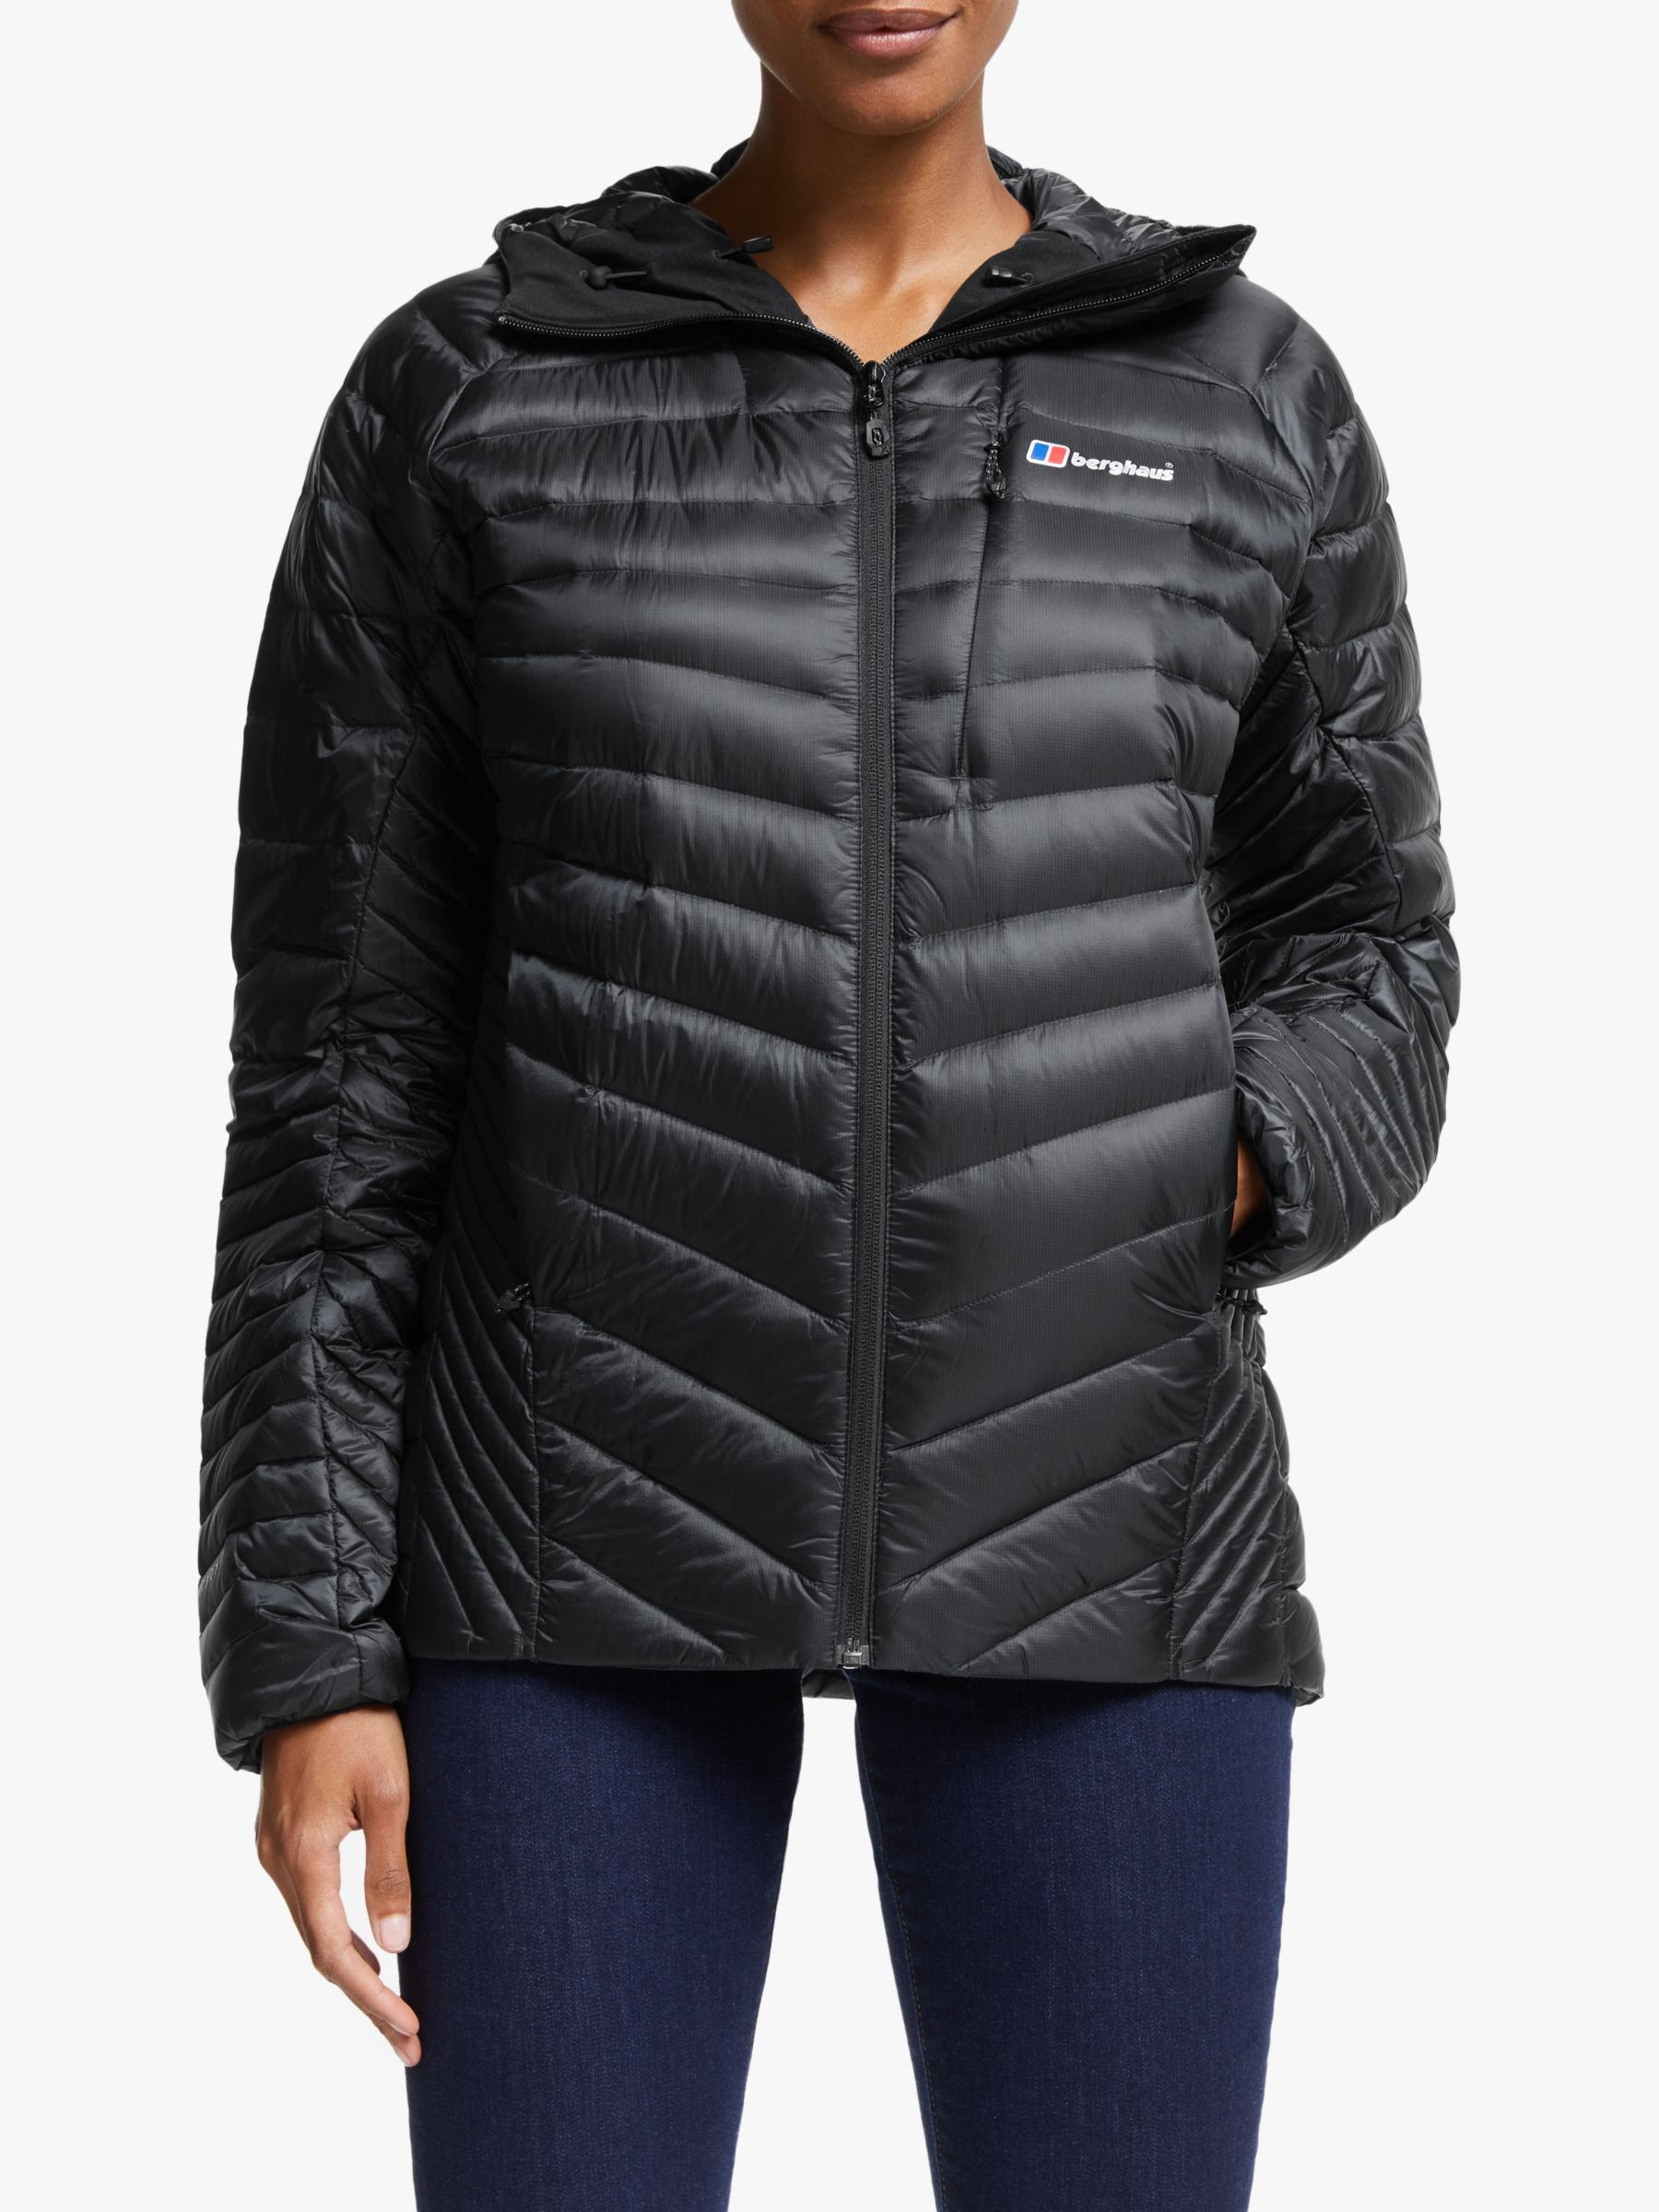 Berghaus Extrem Micro 2.0 Down Women's Insulated Jacket, Jet Black, 16